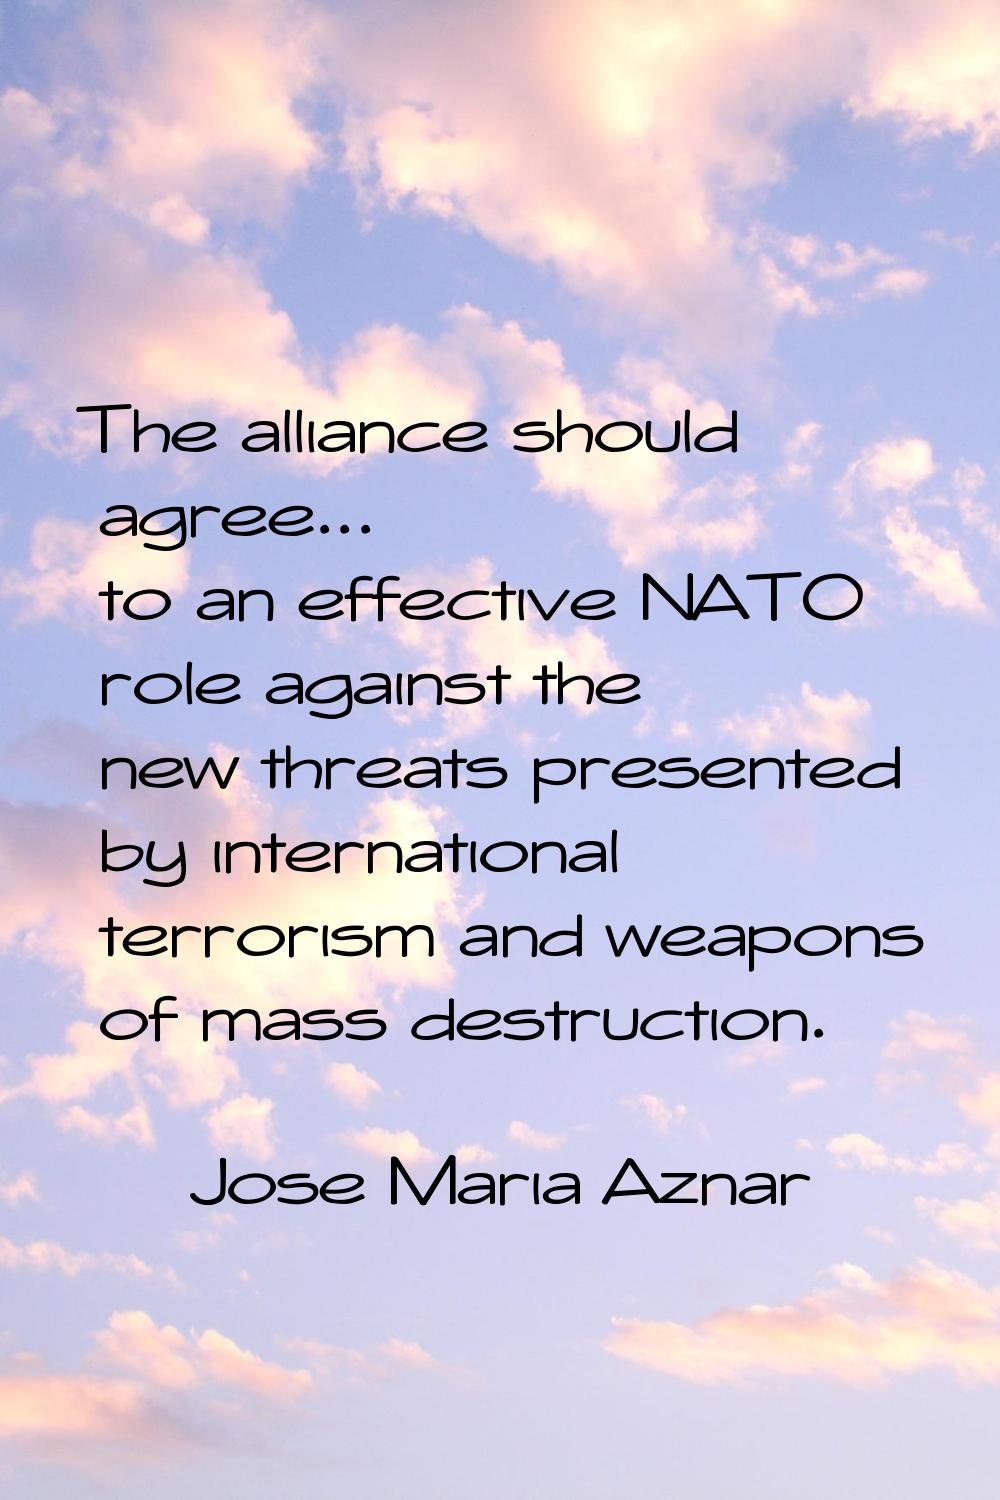 The alliance should agree... to an effective NATO role against the new threats presented by interna